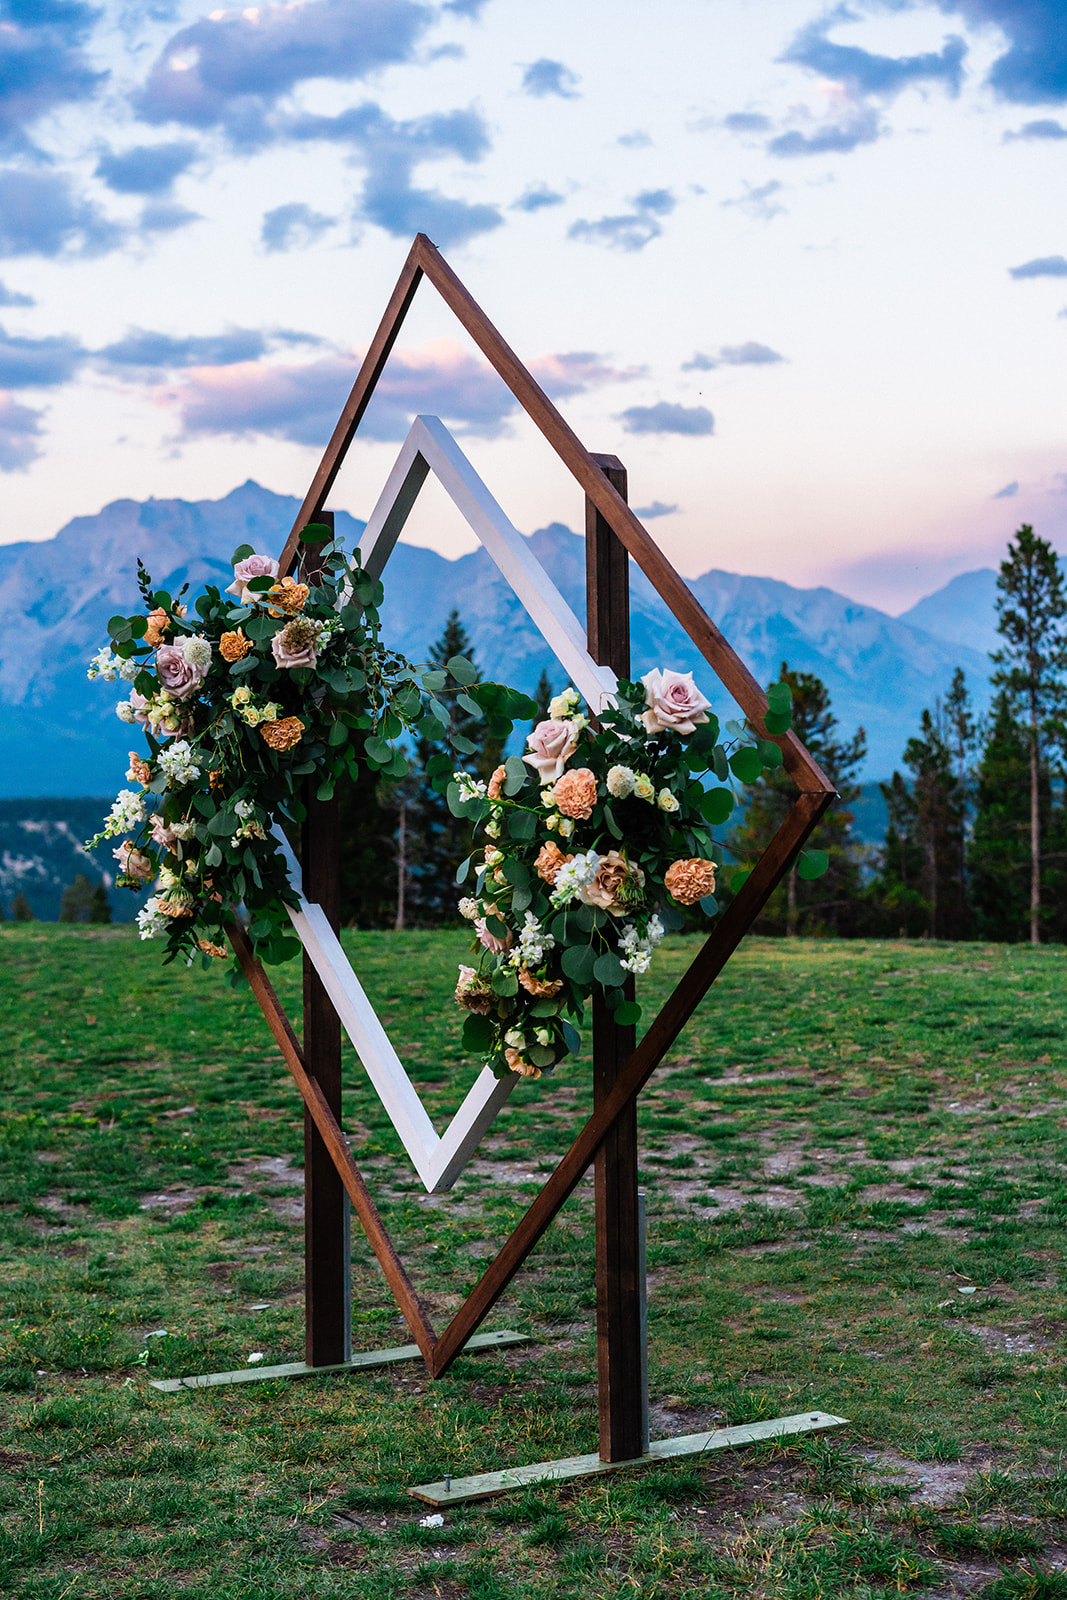 Diamond wedding arch with two bright and colorful floral decorations on either side set against a mountain sunset backdrop in Canmore, Canada during an intimate elopement.